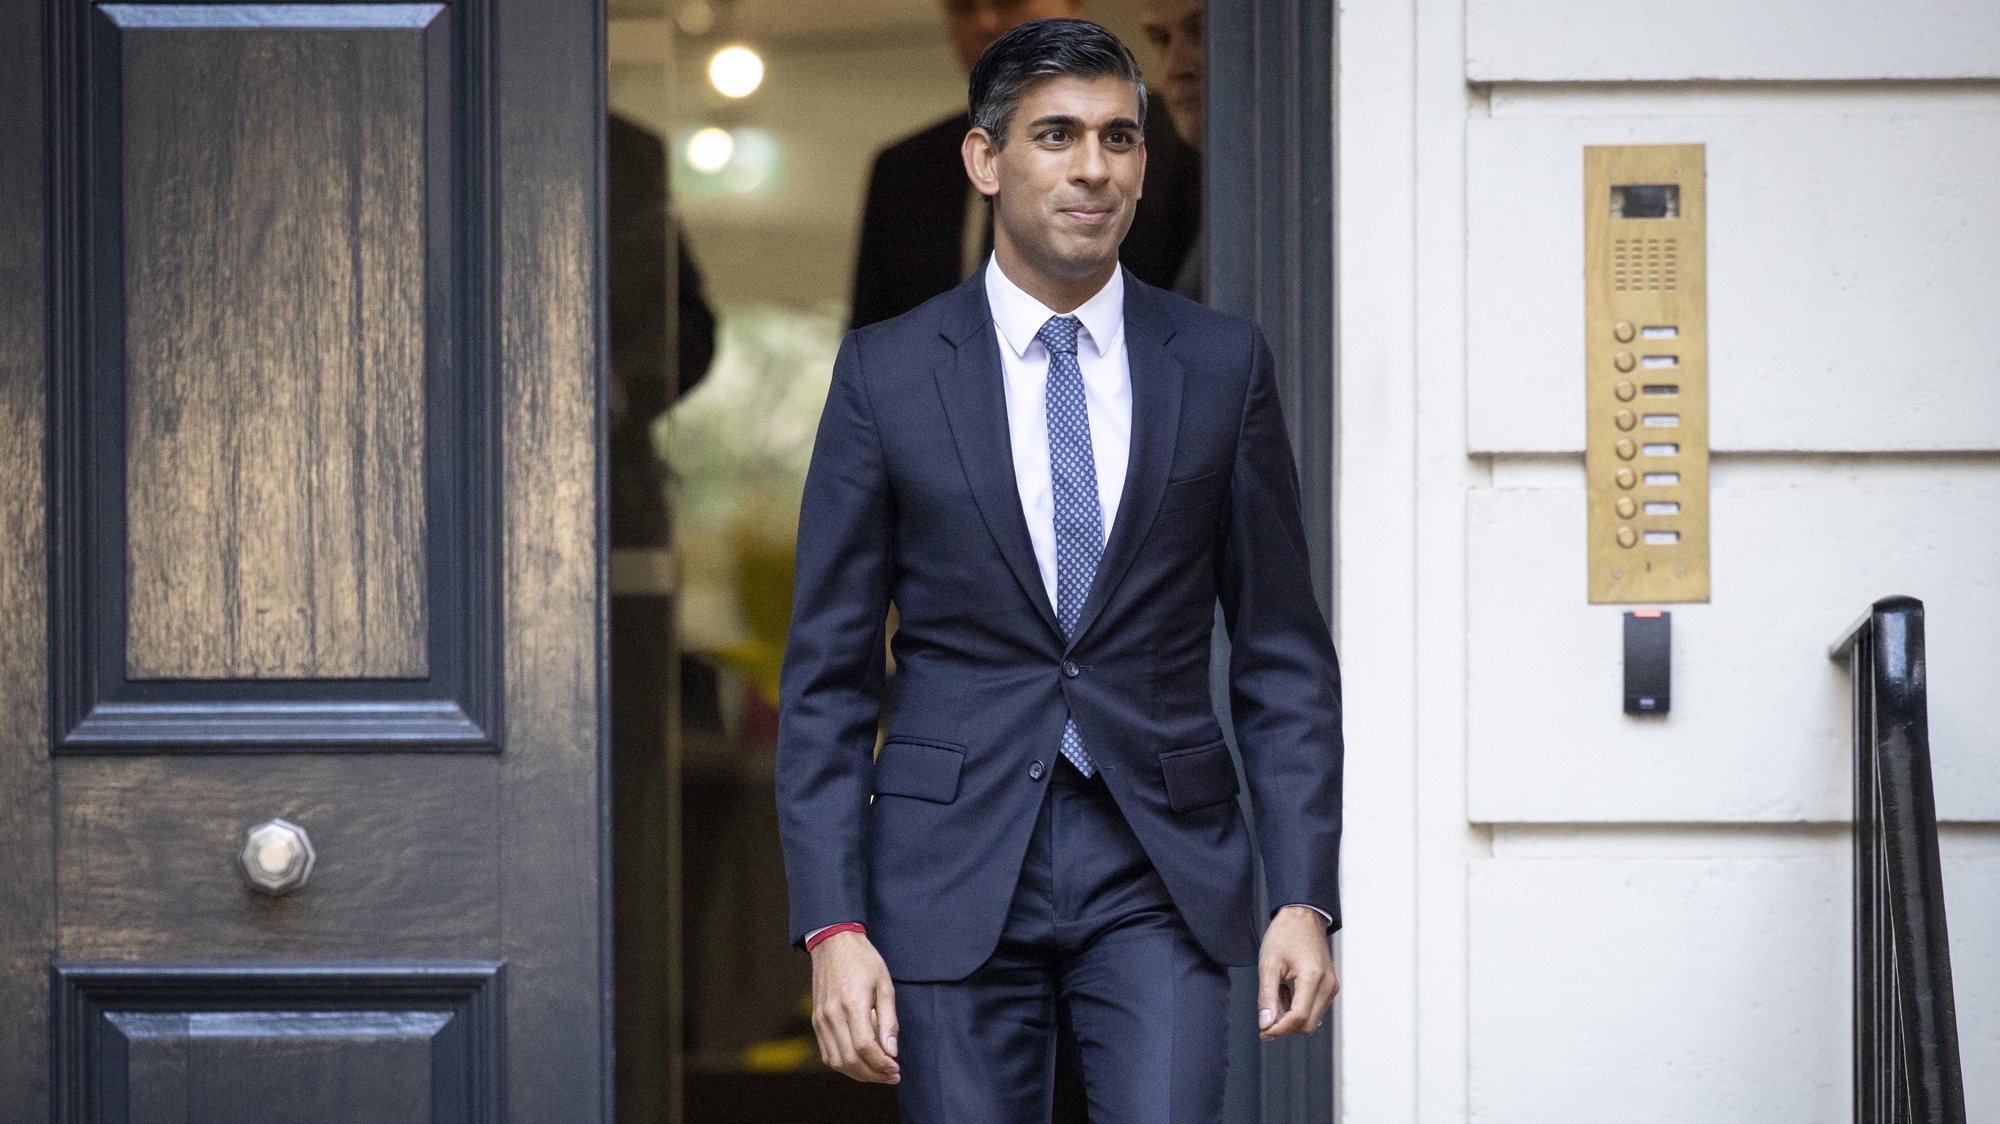 epa10263163 Former British Chancellor of the Exchequer Rishi Sunak leaves the Conservative Central Office after it was announced by the Chair of the 1922 Committee that he will become the new leader of the Conservative Party in London, Britain, 24 October 2022. Sunak will succeed Liz Truss as prime minister, after rival candidate Mordaunt withdrew from the party leadership contest.  EPA/TOLGA AKMEN